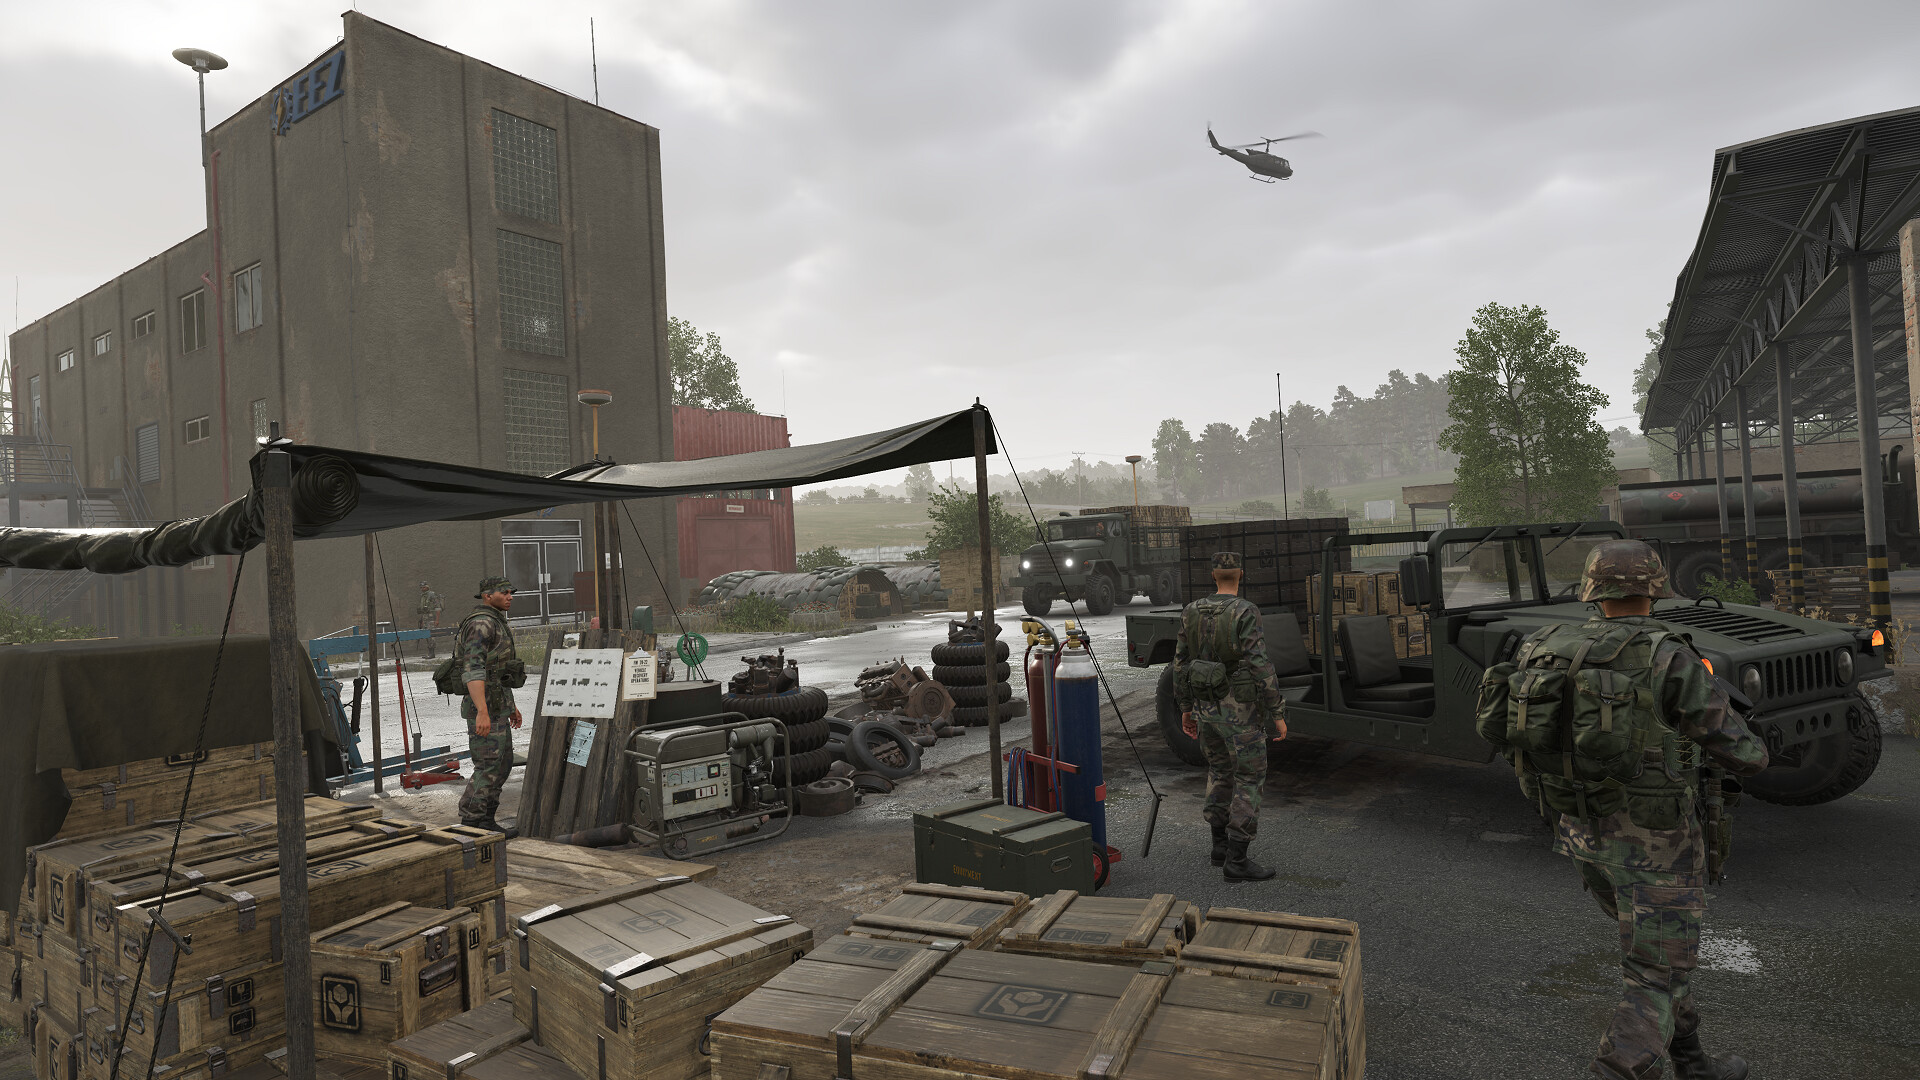 Arma Reforger mods are cross-compatible between PC and Xbox